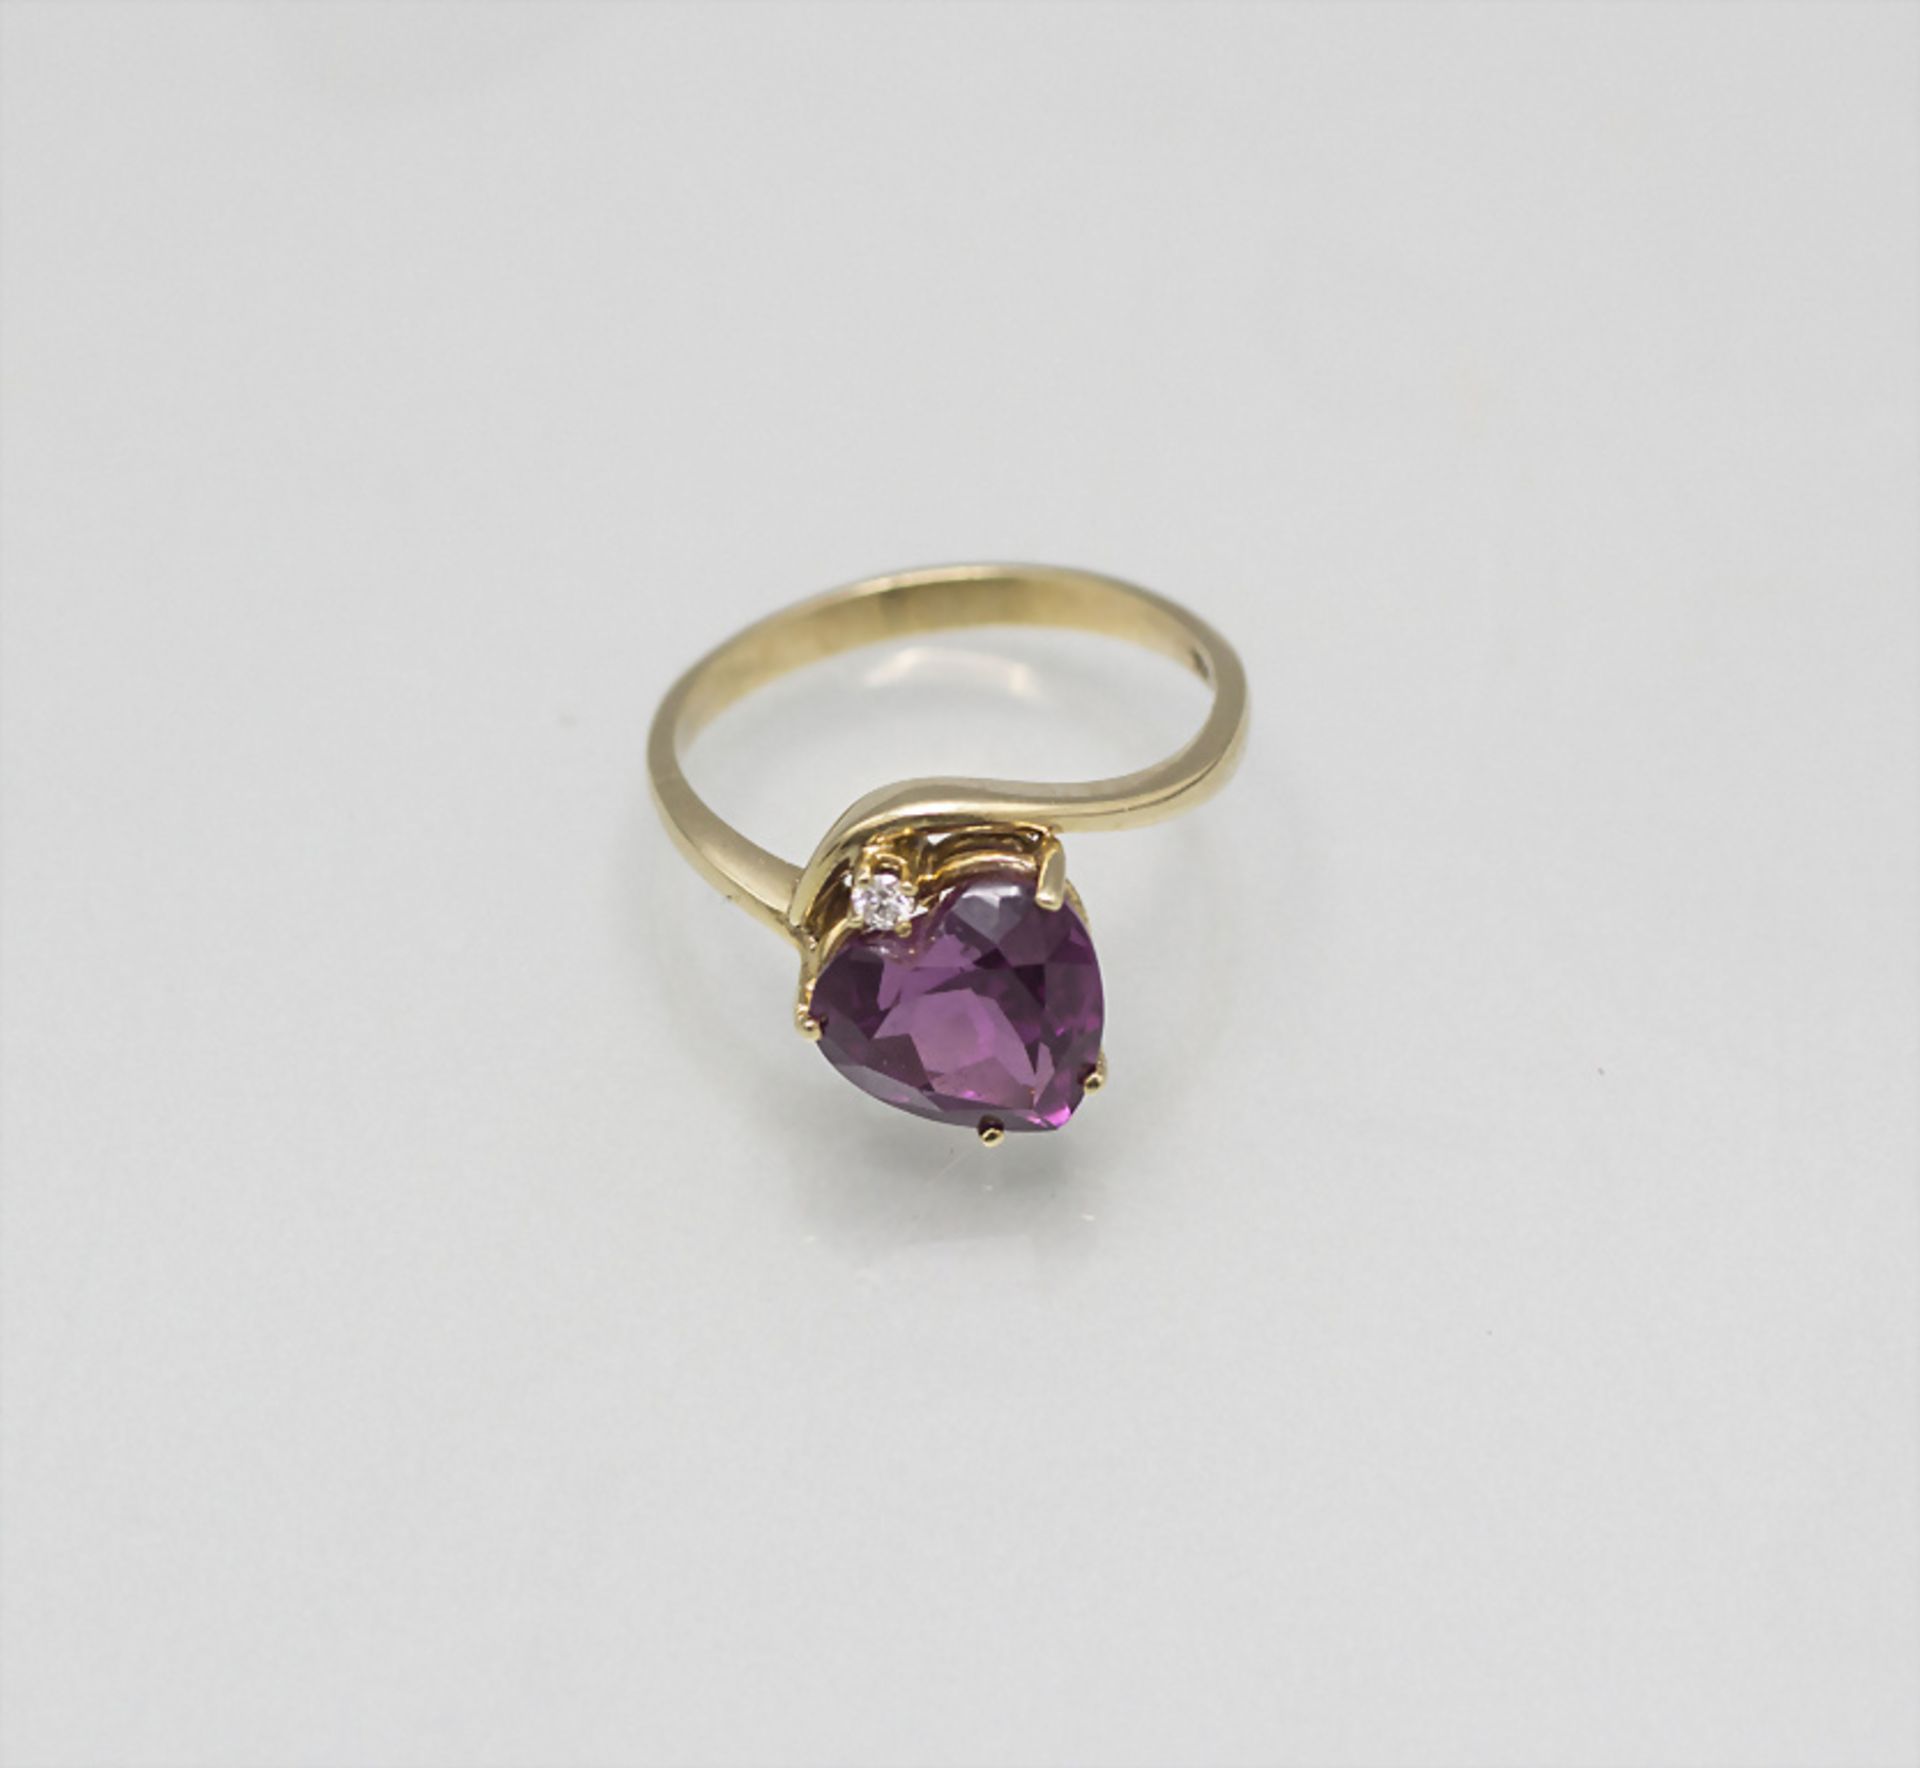 Damenring mit Amethyst / A 14 ct ladies gold ring with an amethyst - Image 2 of 3